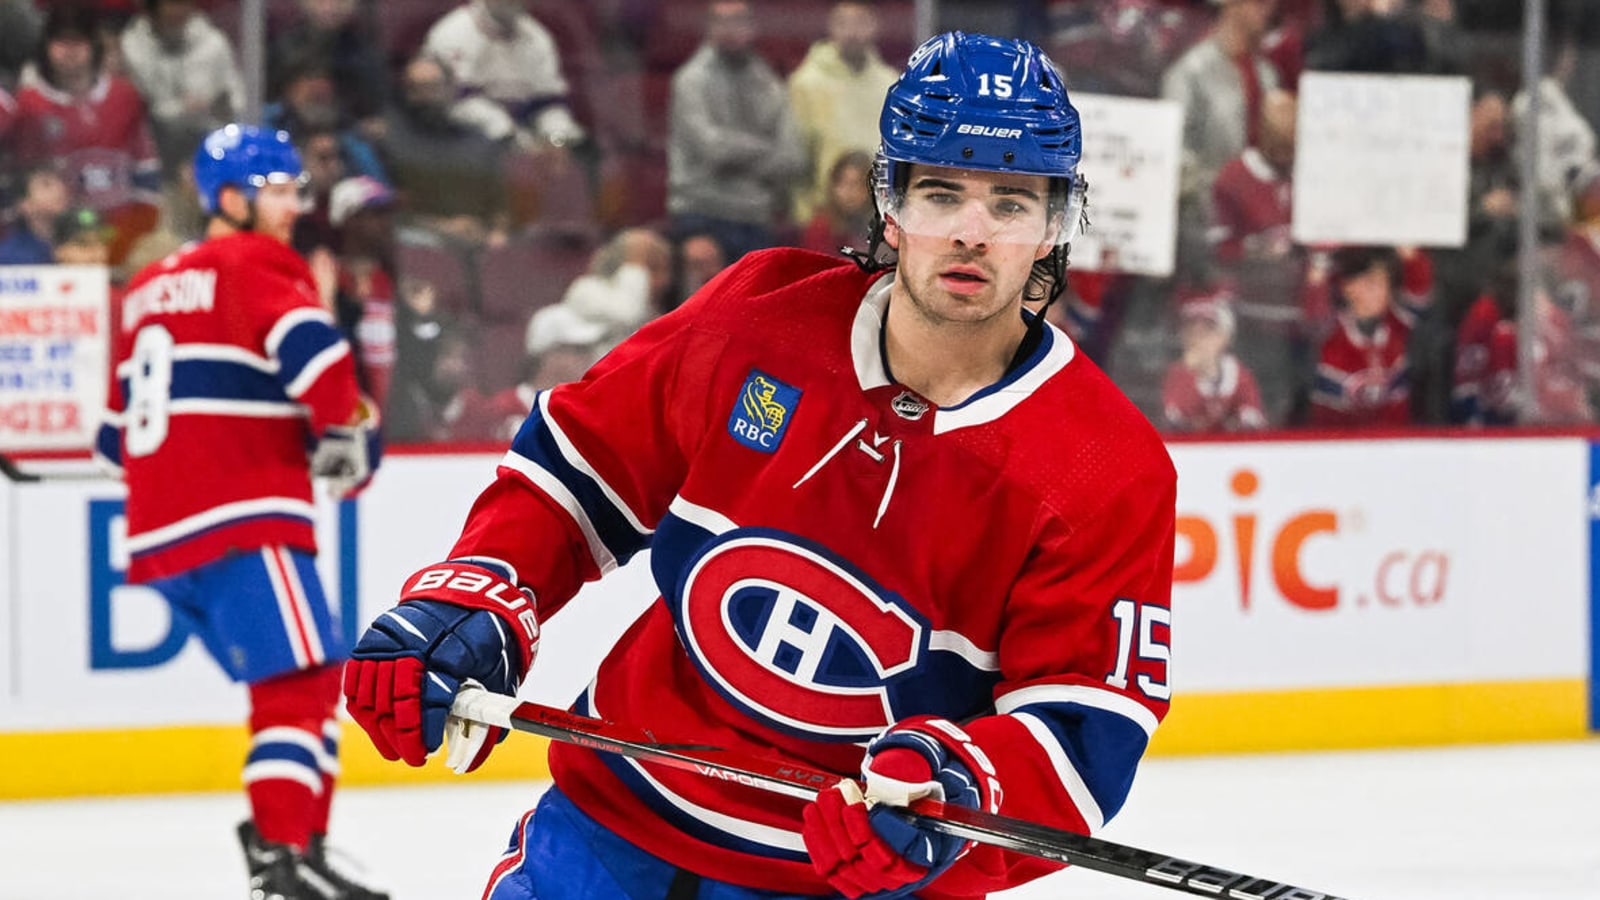 Canadiens forward out 10-12 weeks with high-ankle sprain